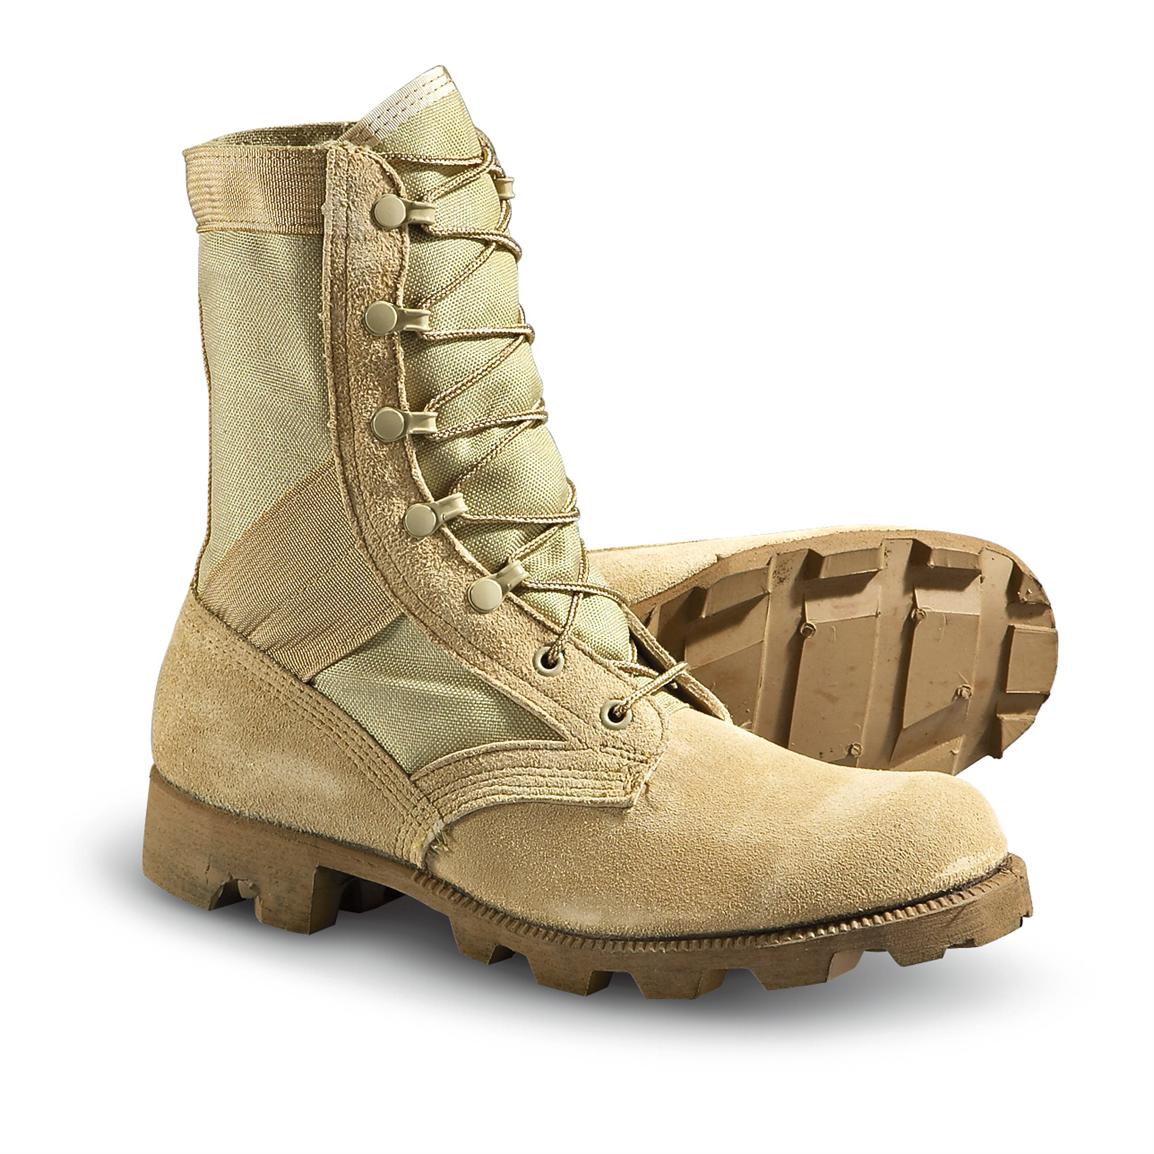 Used U.S. Military Hot Weather Combat Boots, Desert Tan - 149499 ...